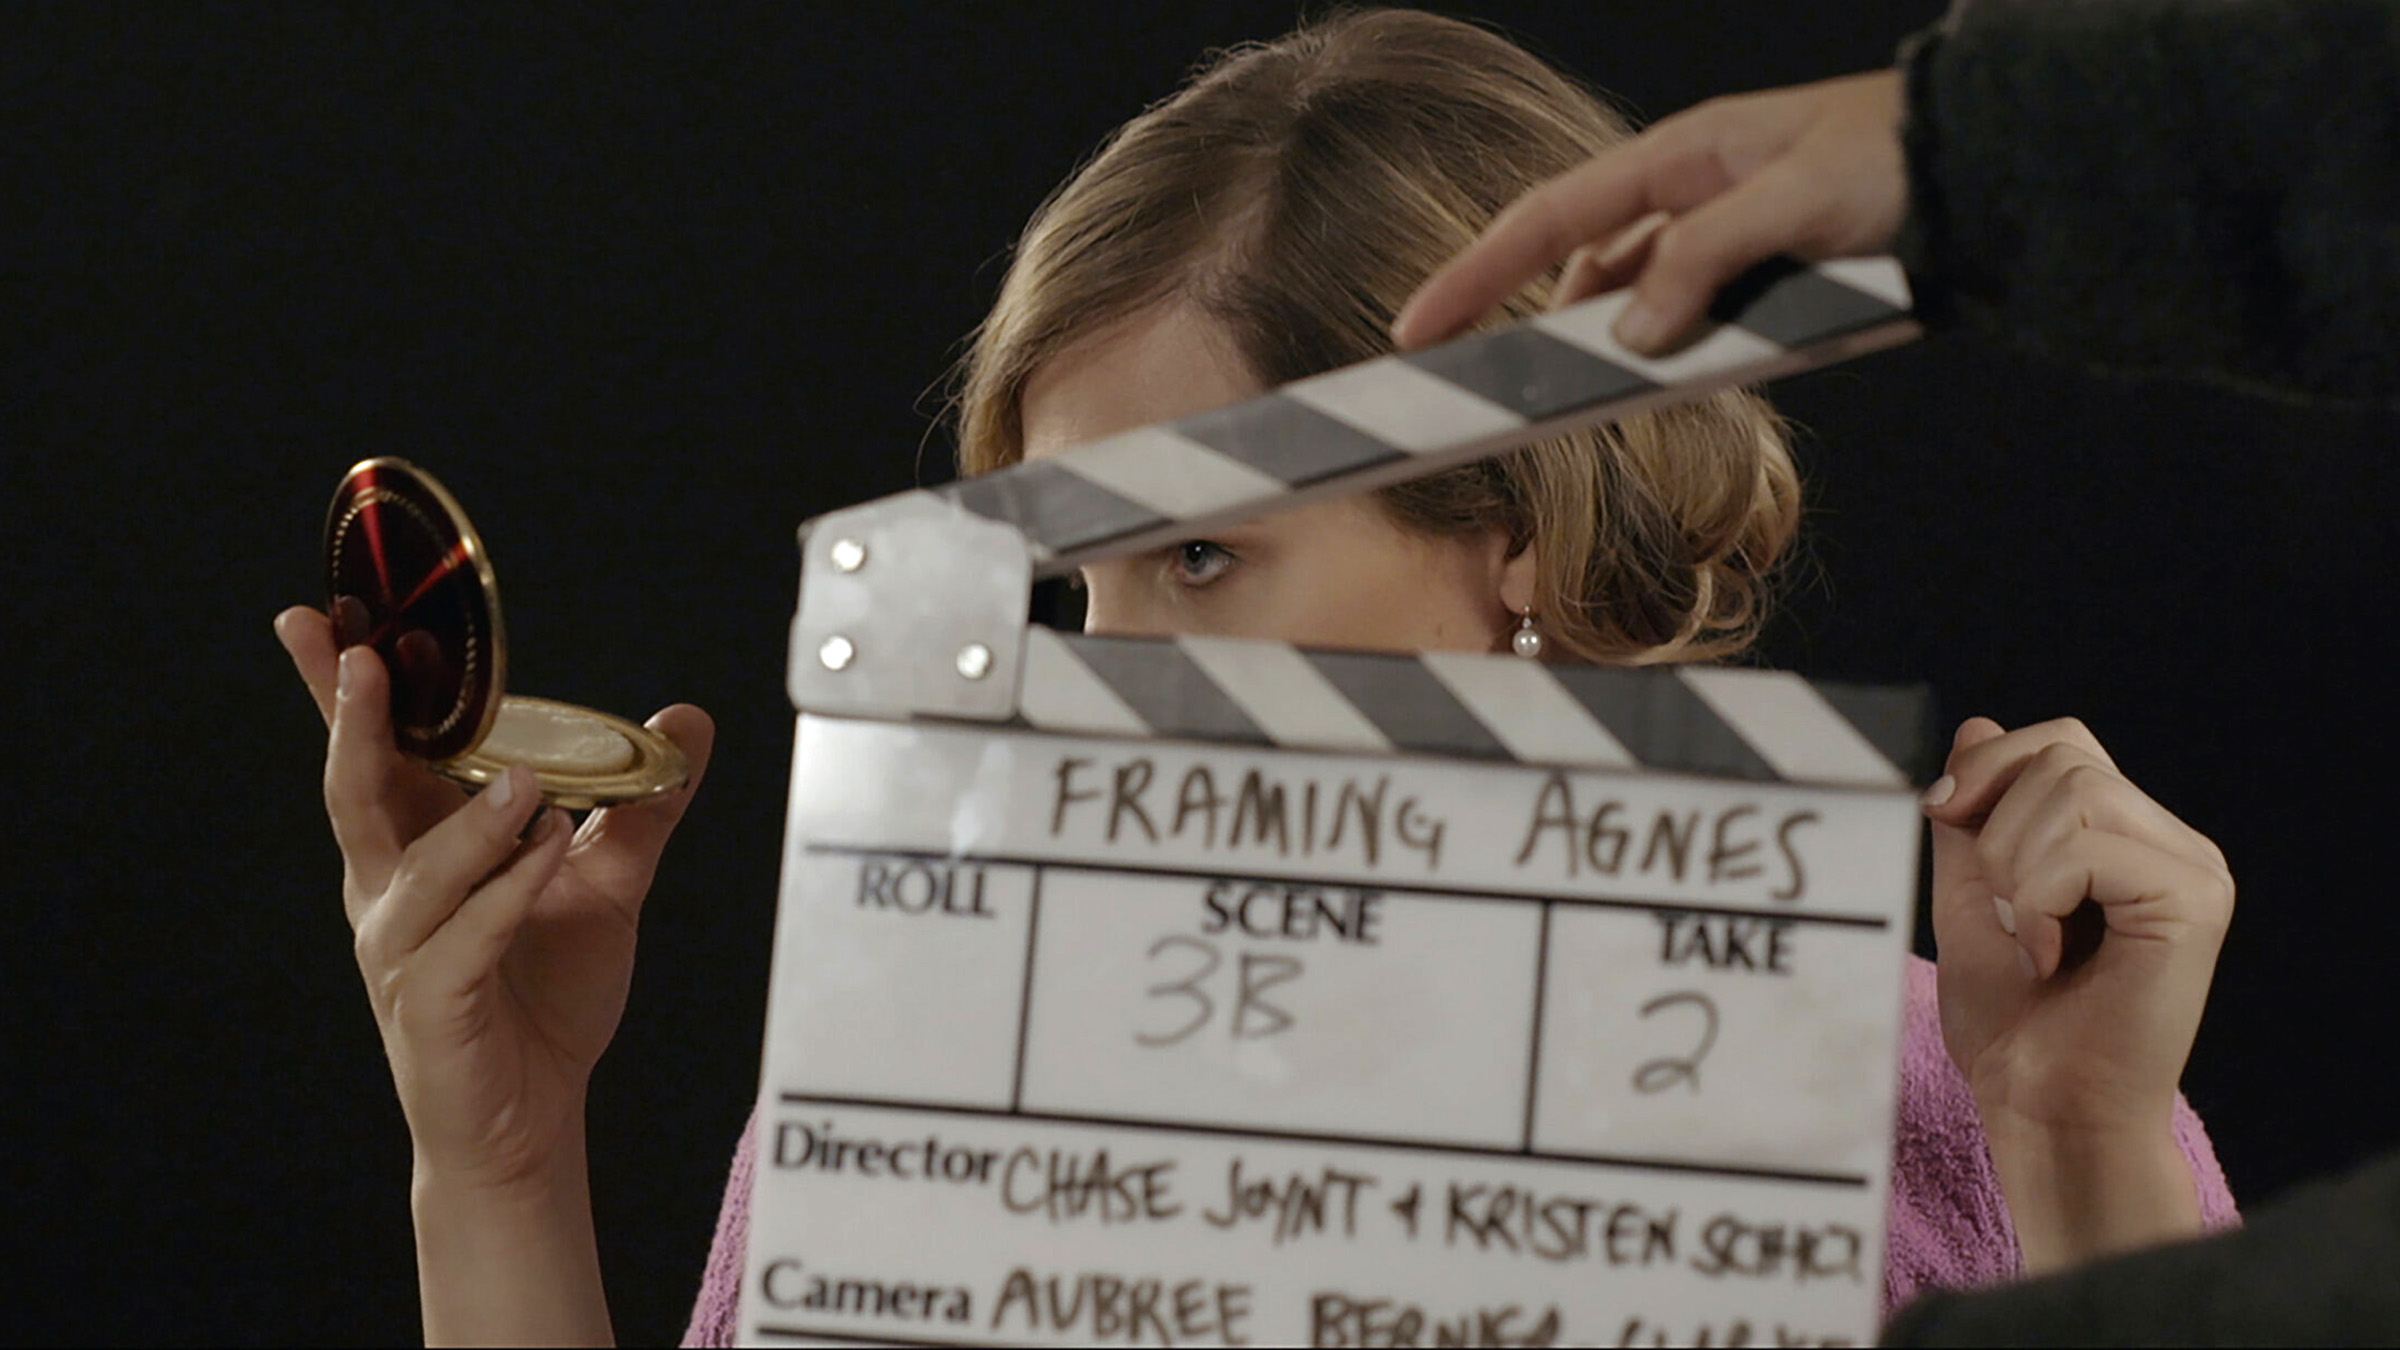 Bringing Untold Stories to Light in “Framing Agnes”